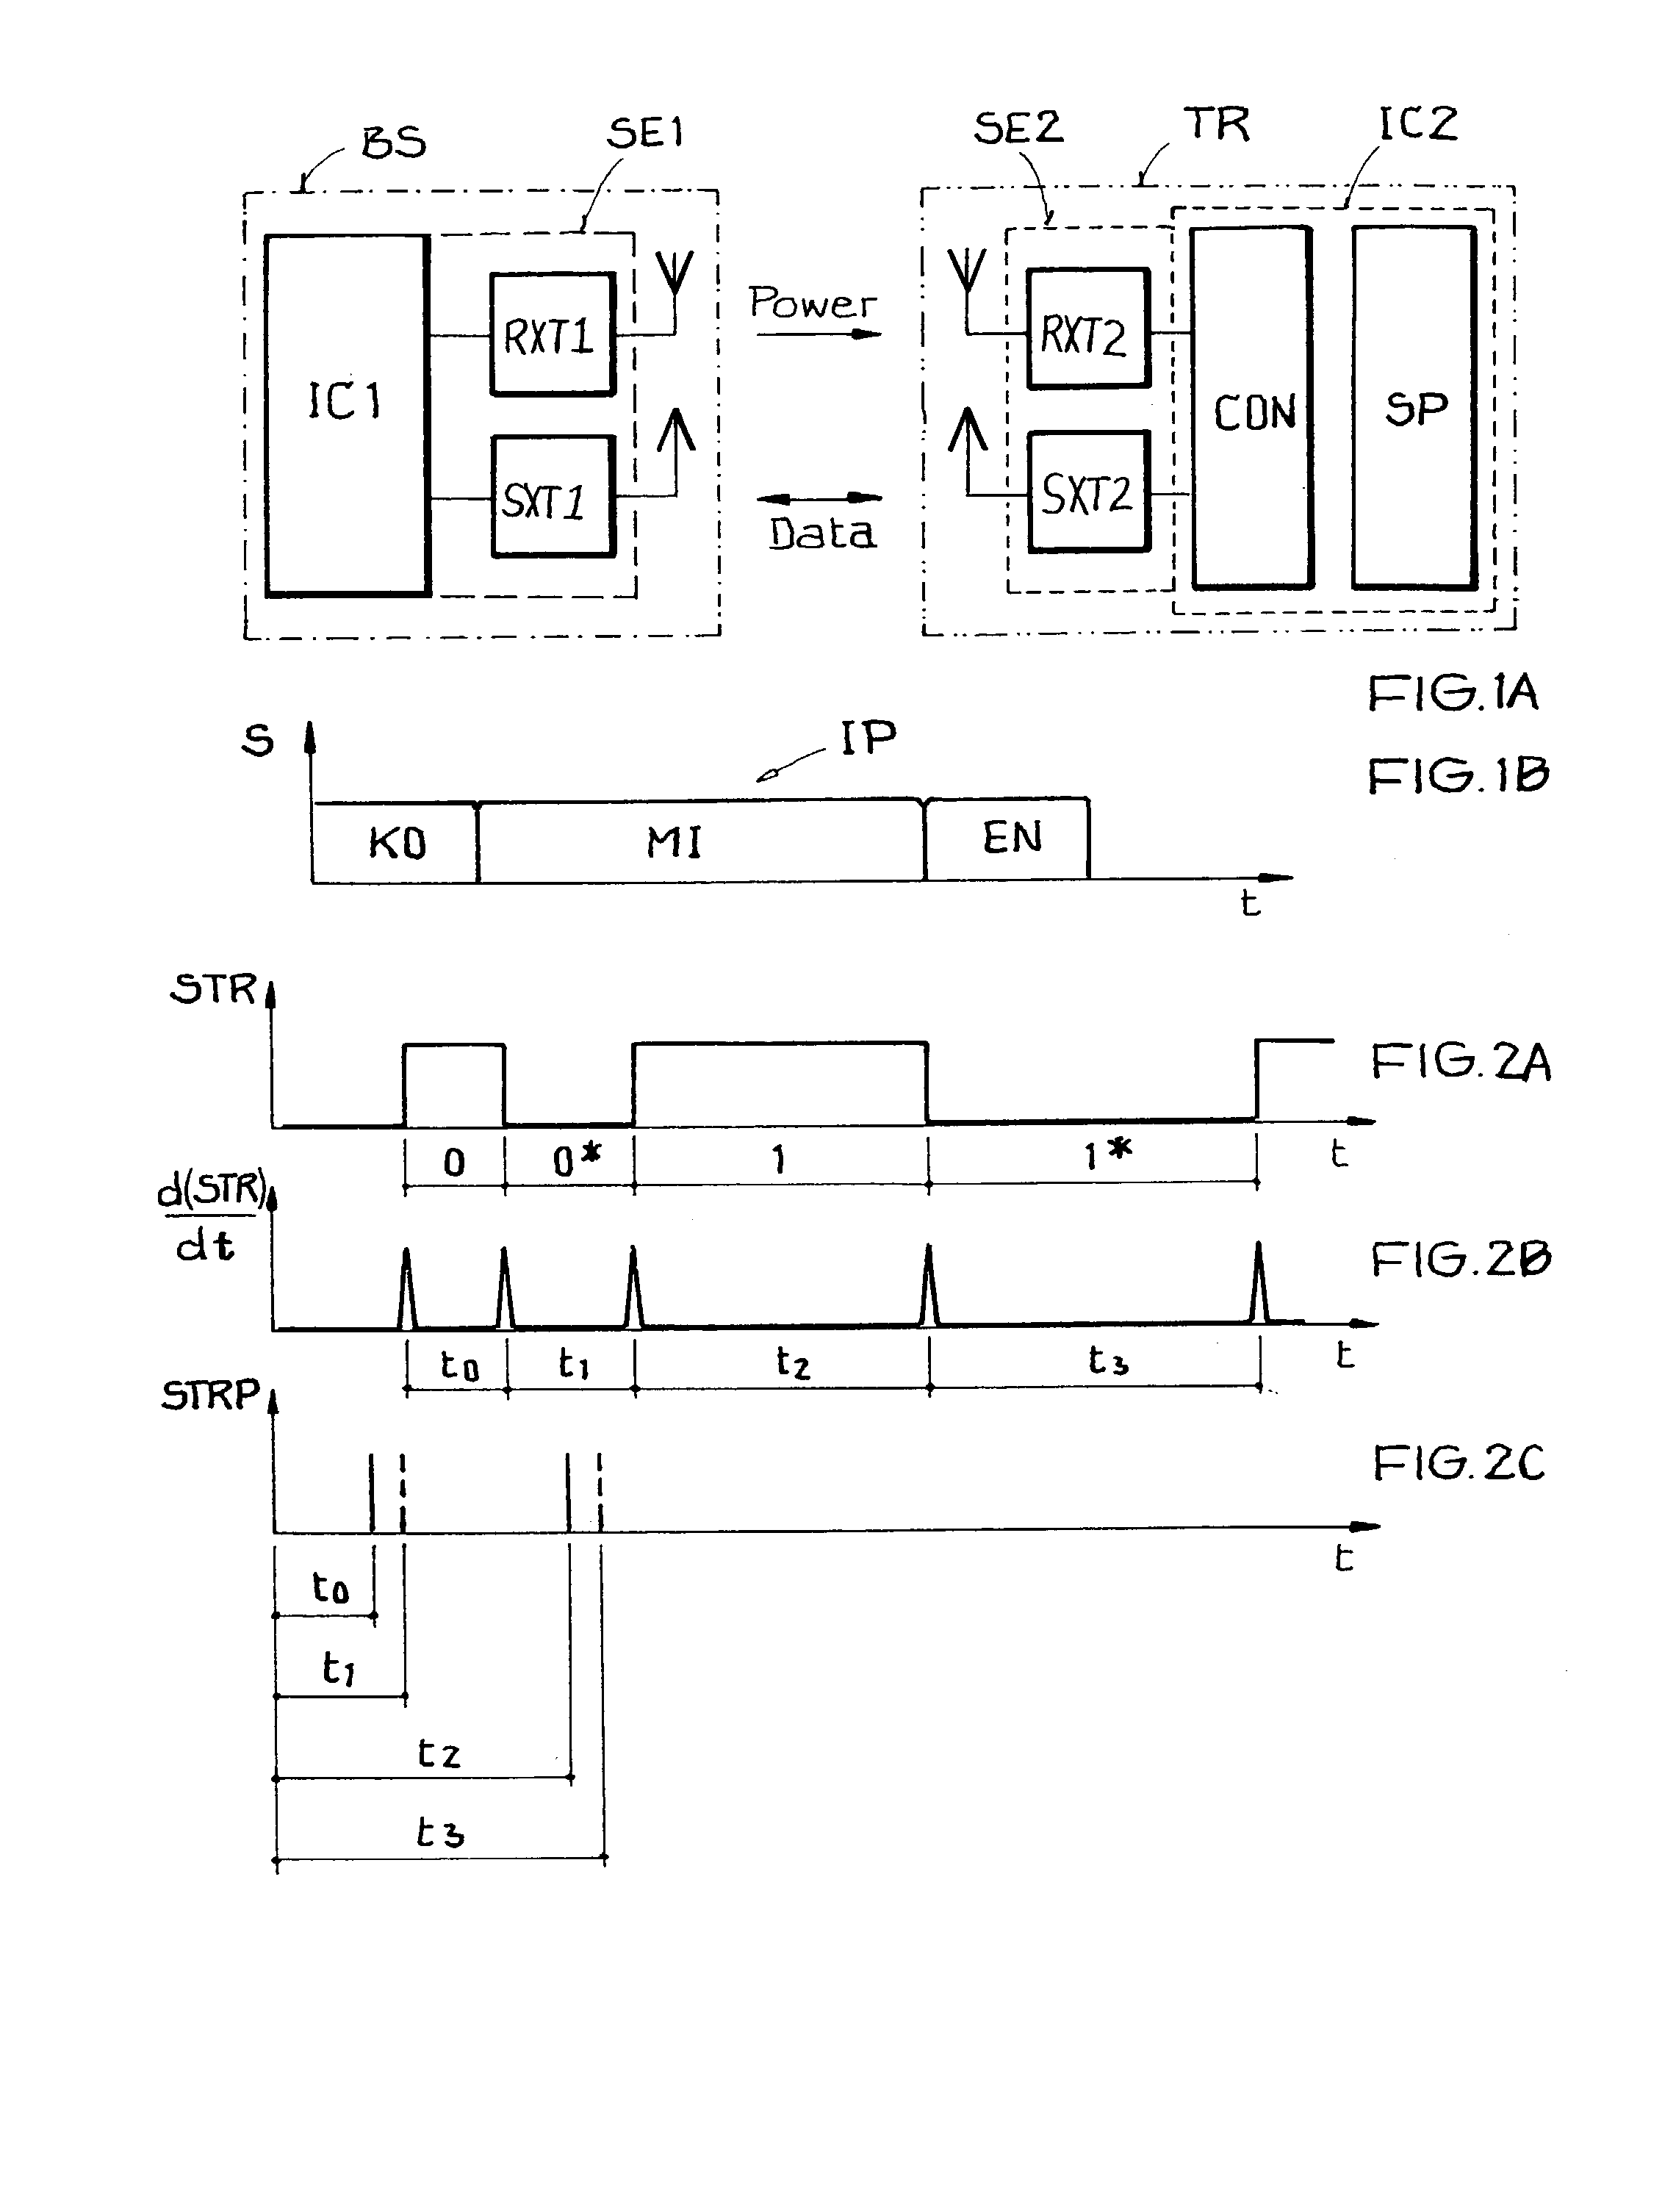 Method of transmitting data with optimized transmission rate using packet header that defines data encoding parameters